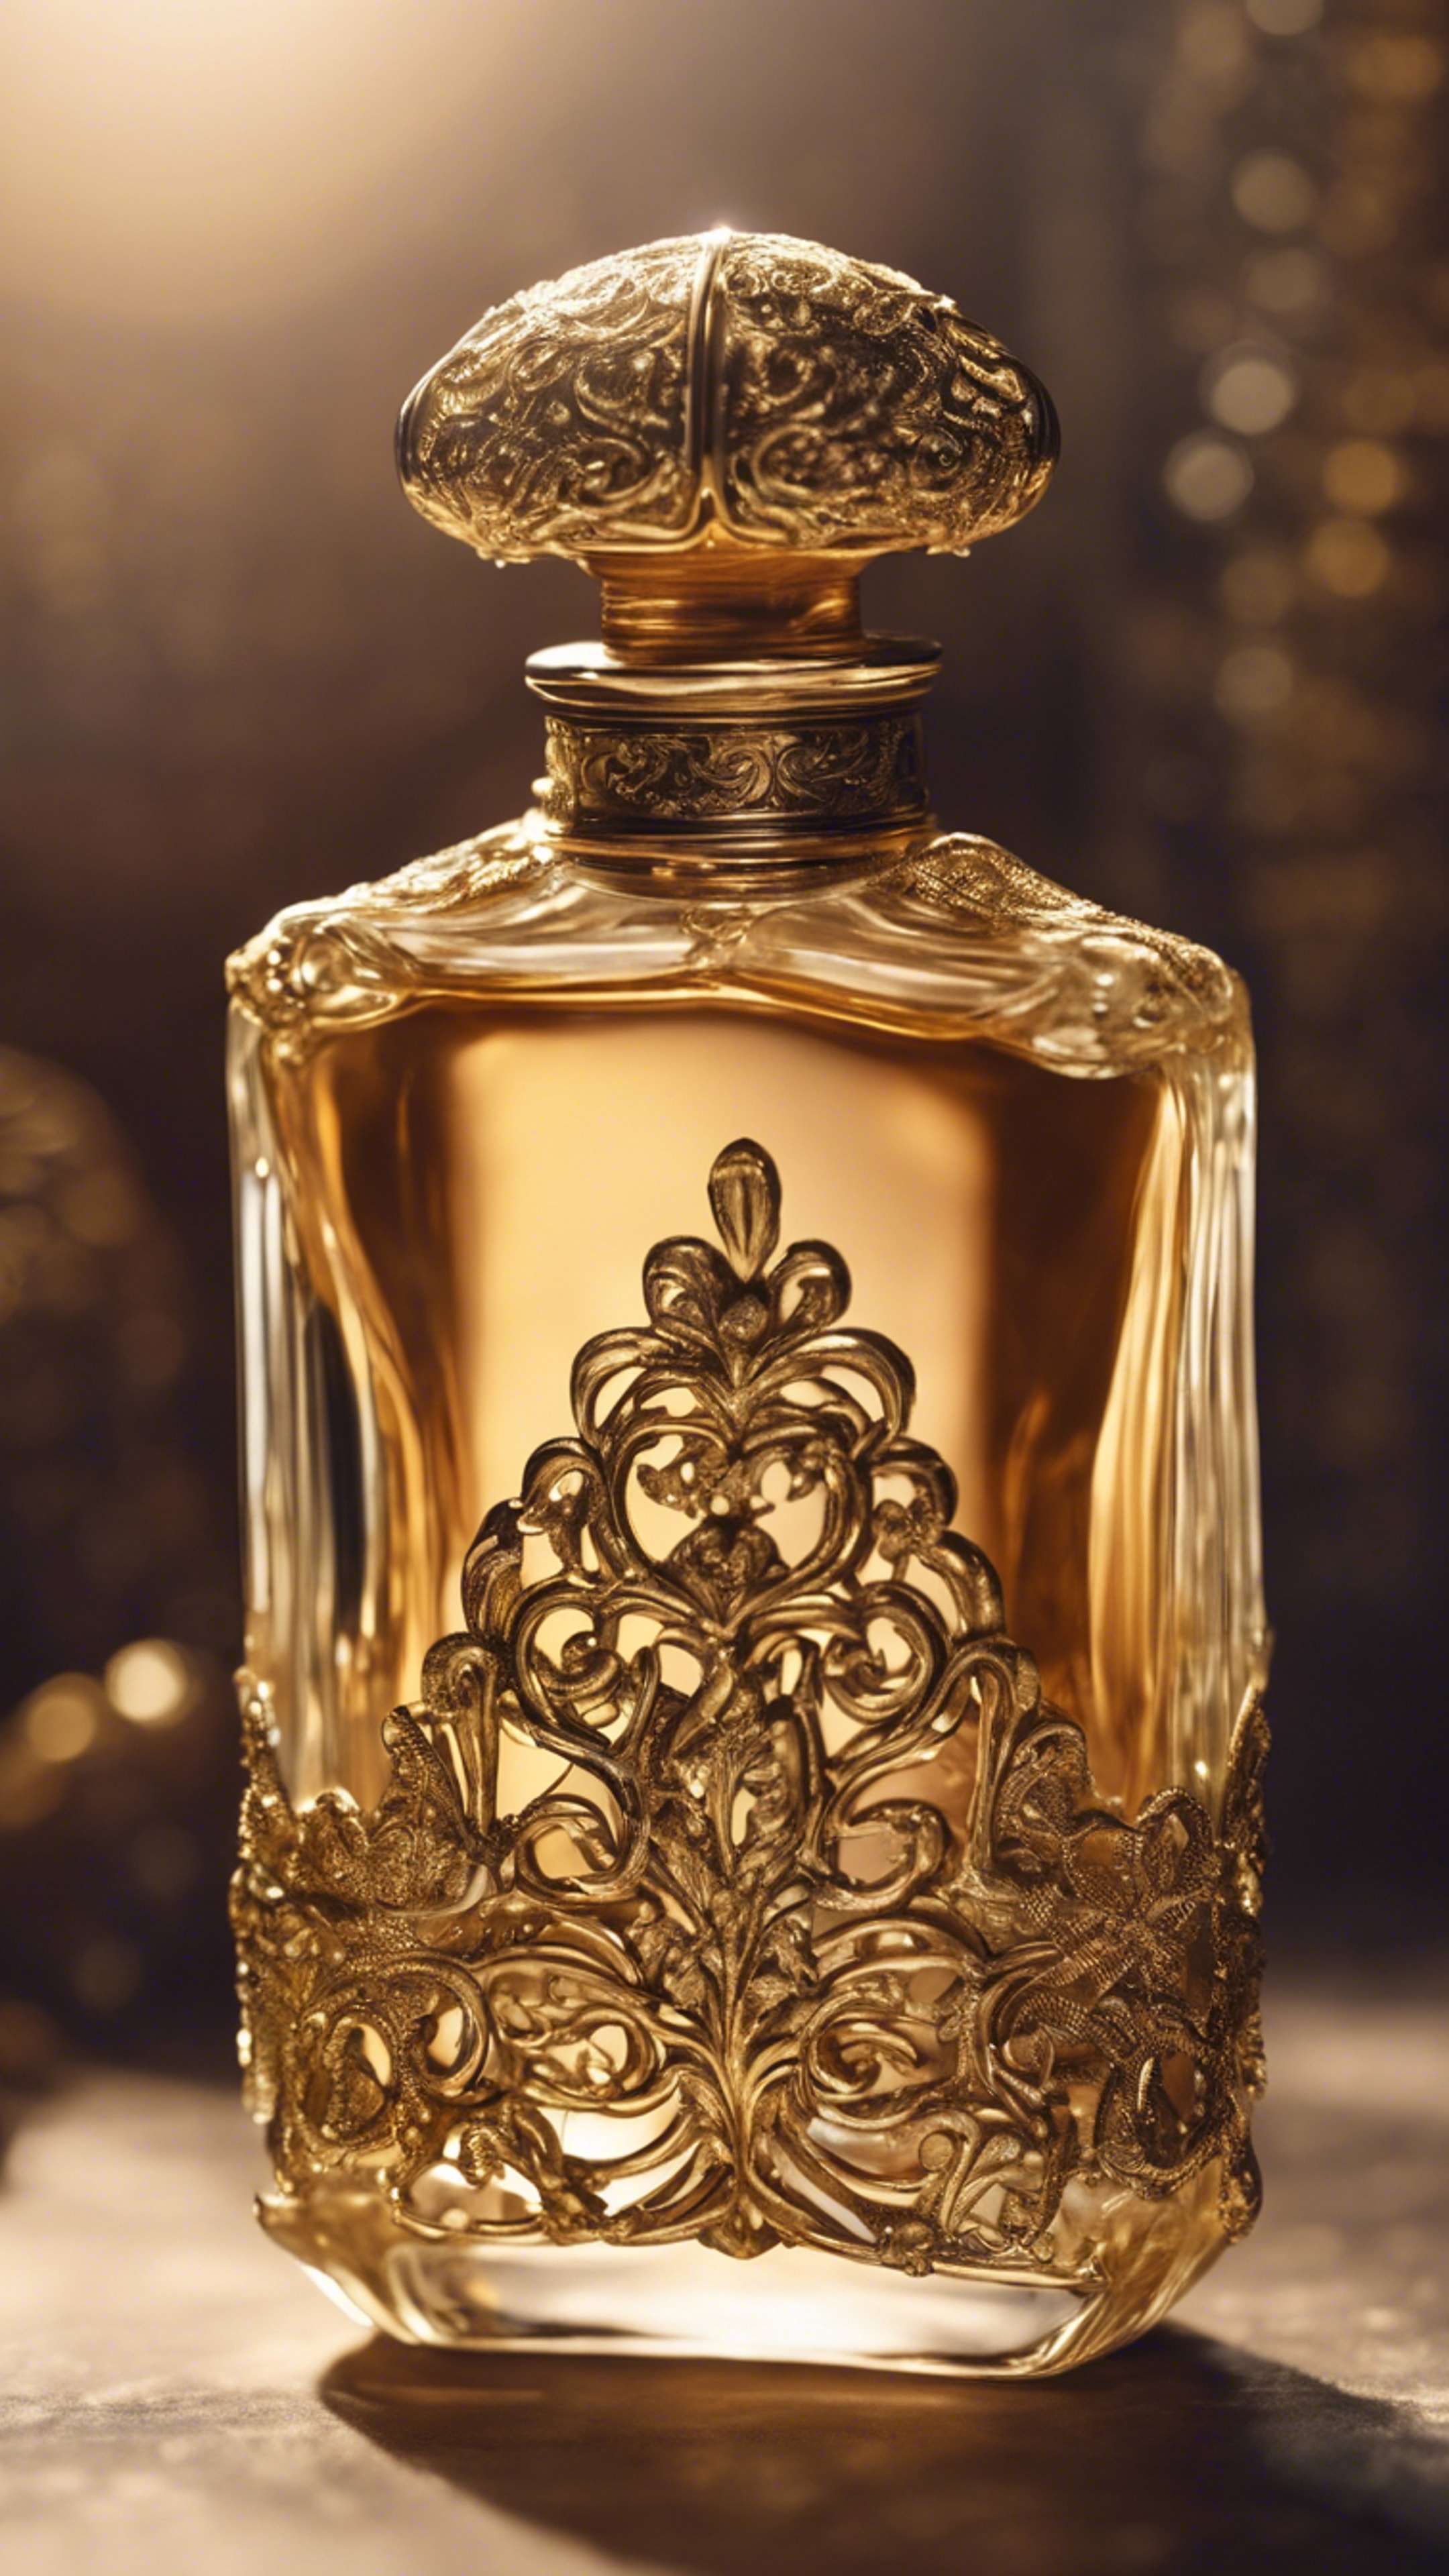 An antique perfume bottle with delicate gold filigree luxury cosmetic item. Wallpaper[fe361f22190a4891a6d9]